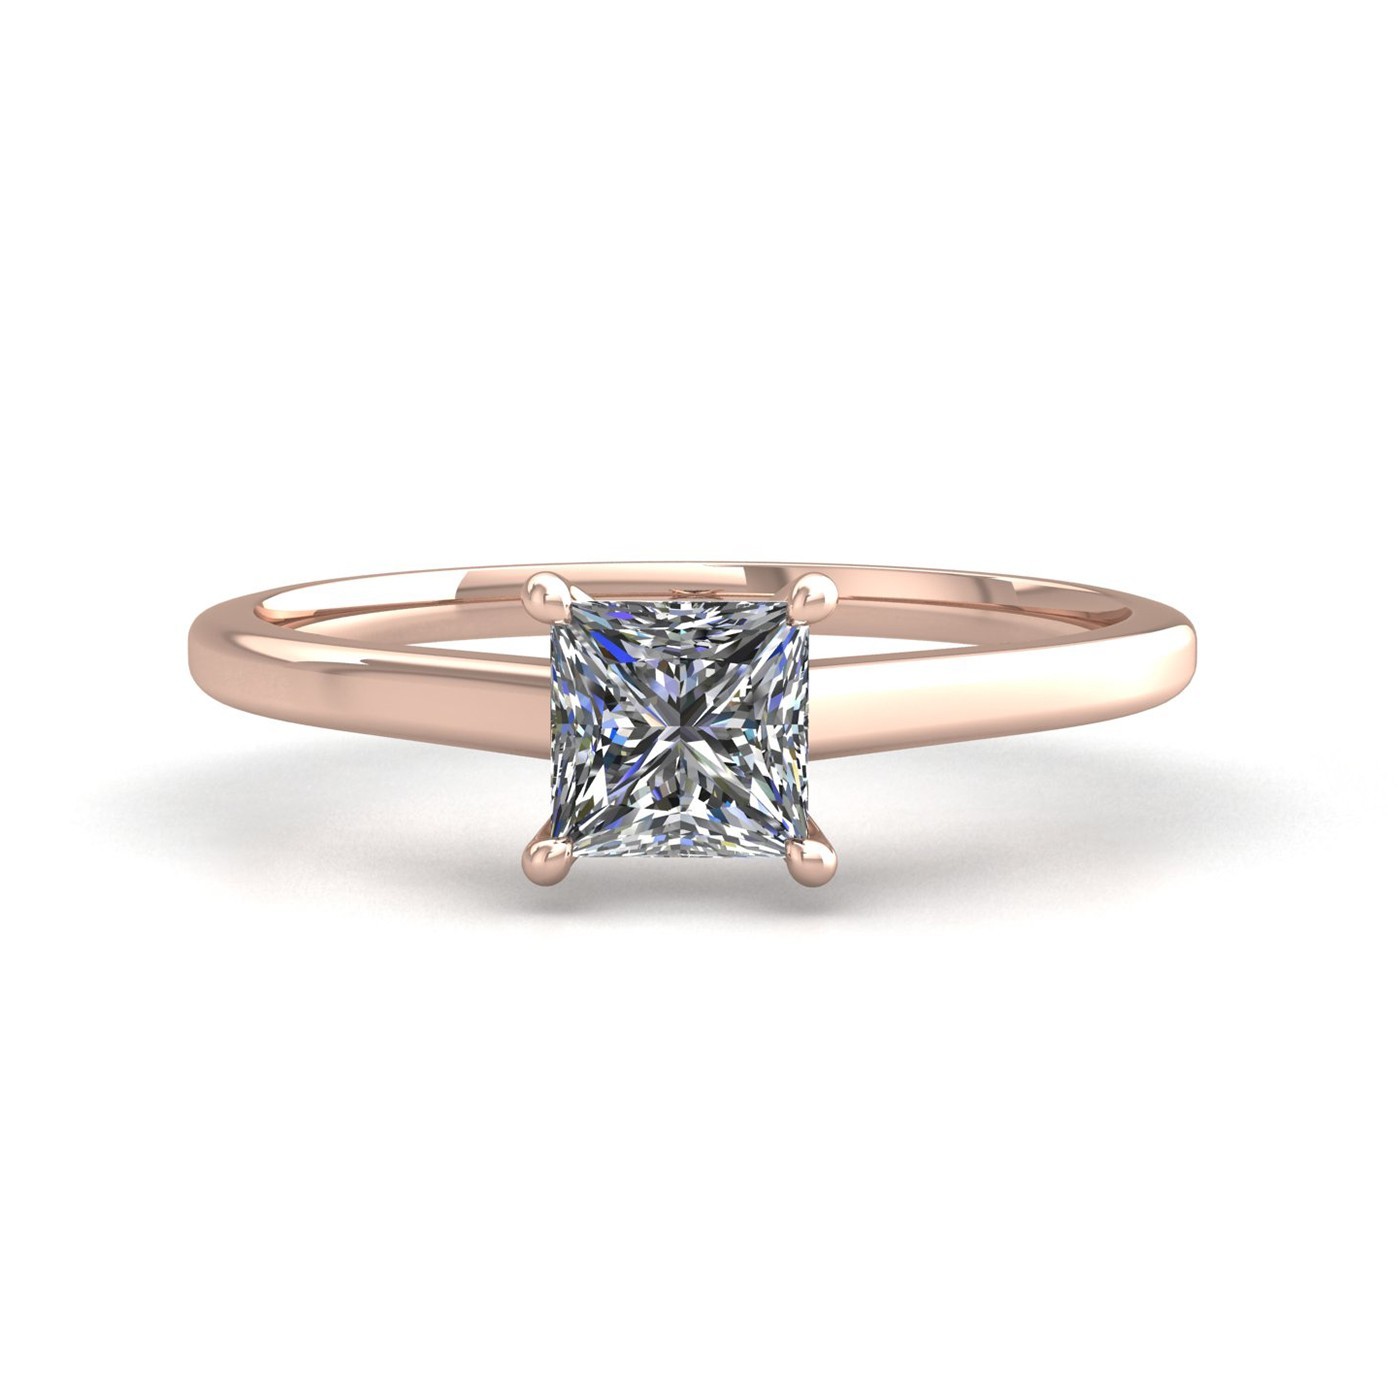 18k rose gold  2,00 ct 4 prongs solitaire princess cut diamond engagement ring with whisper thin band Photos & images